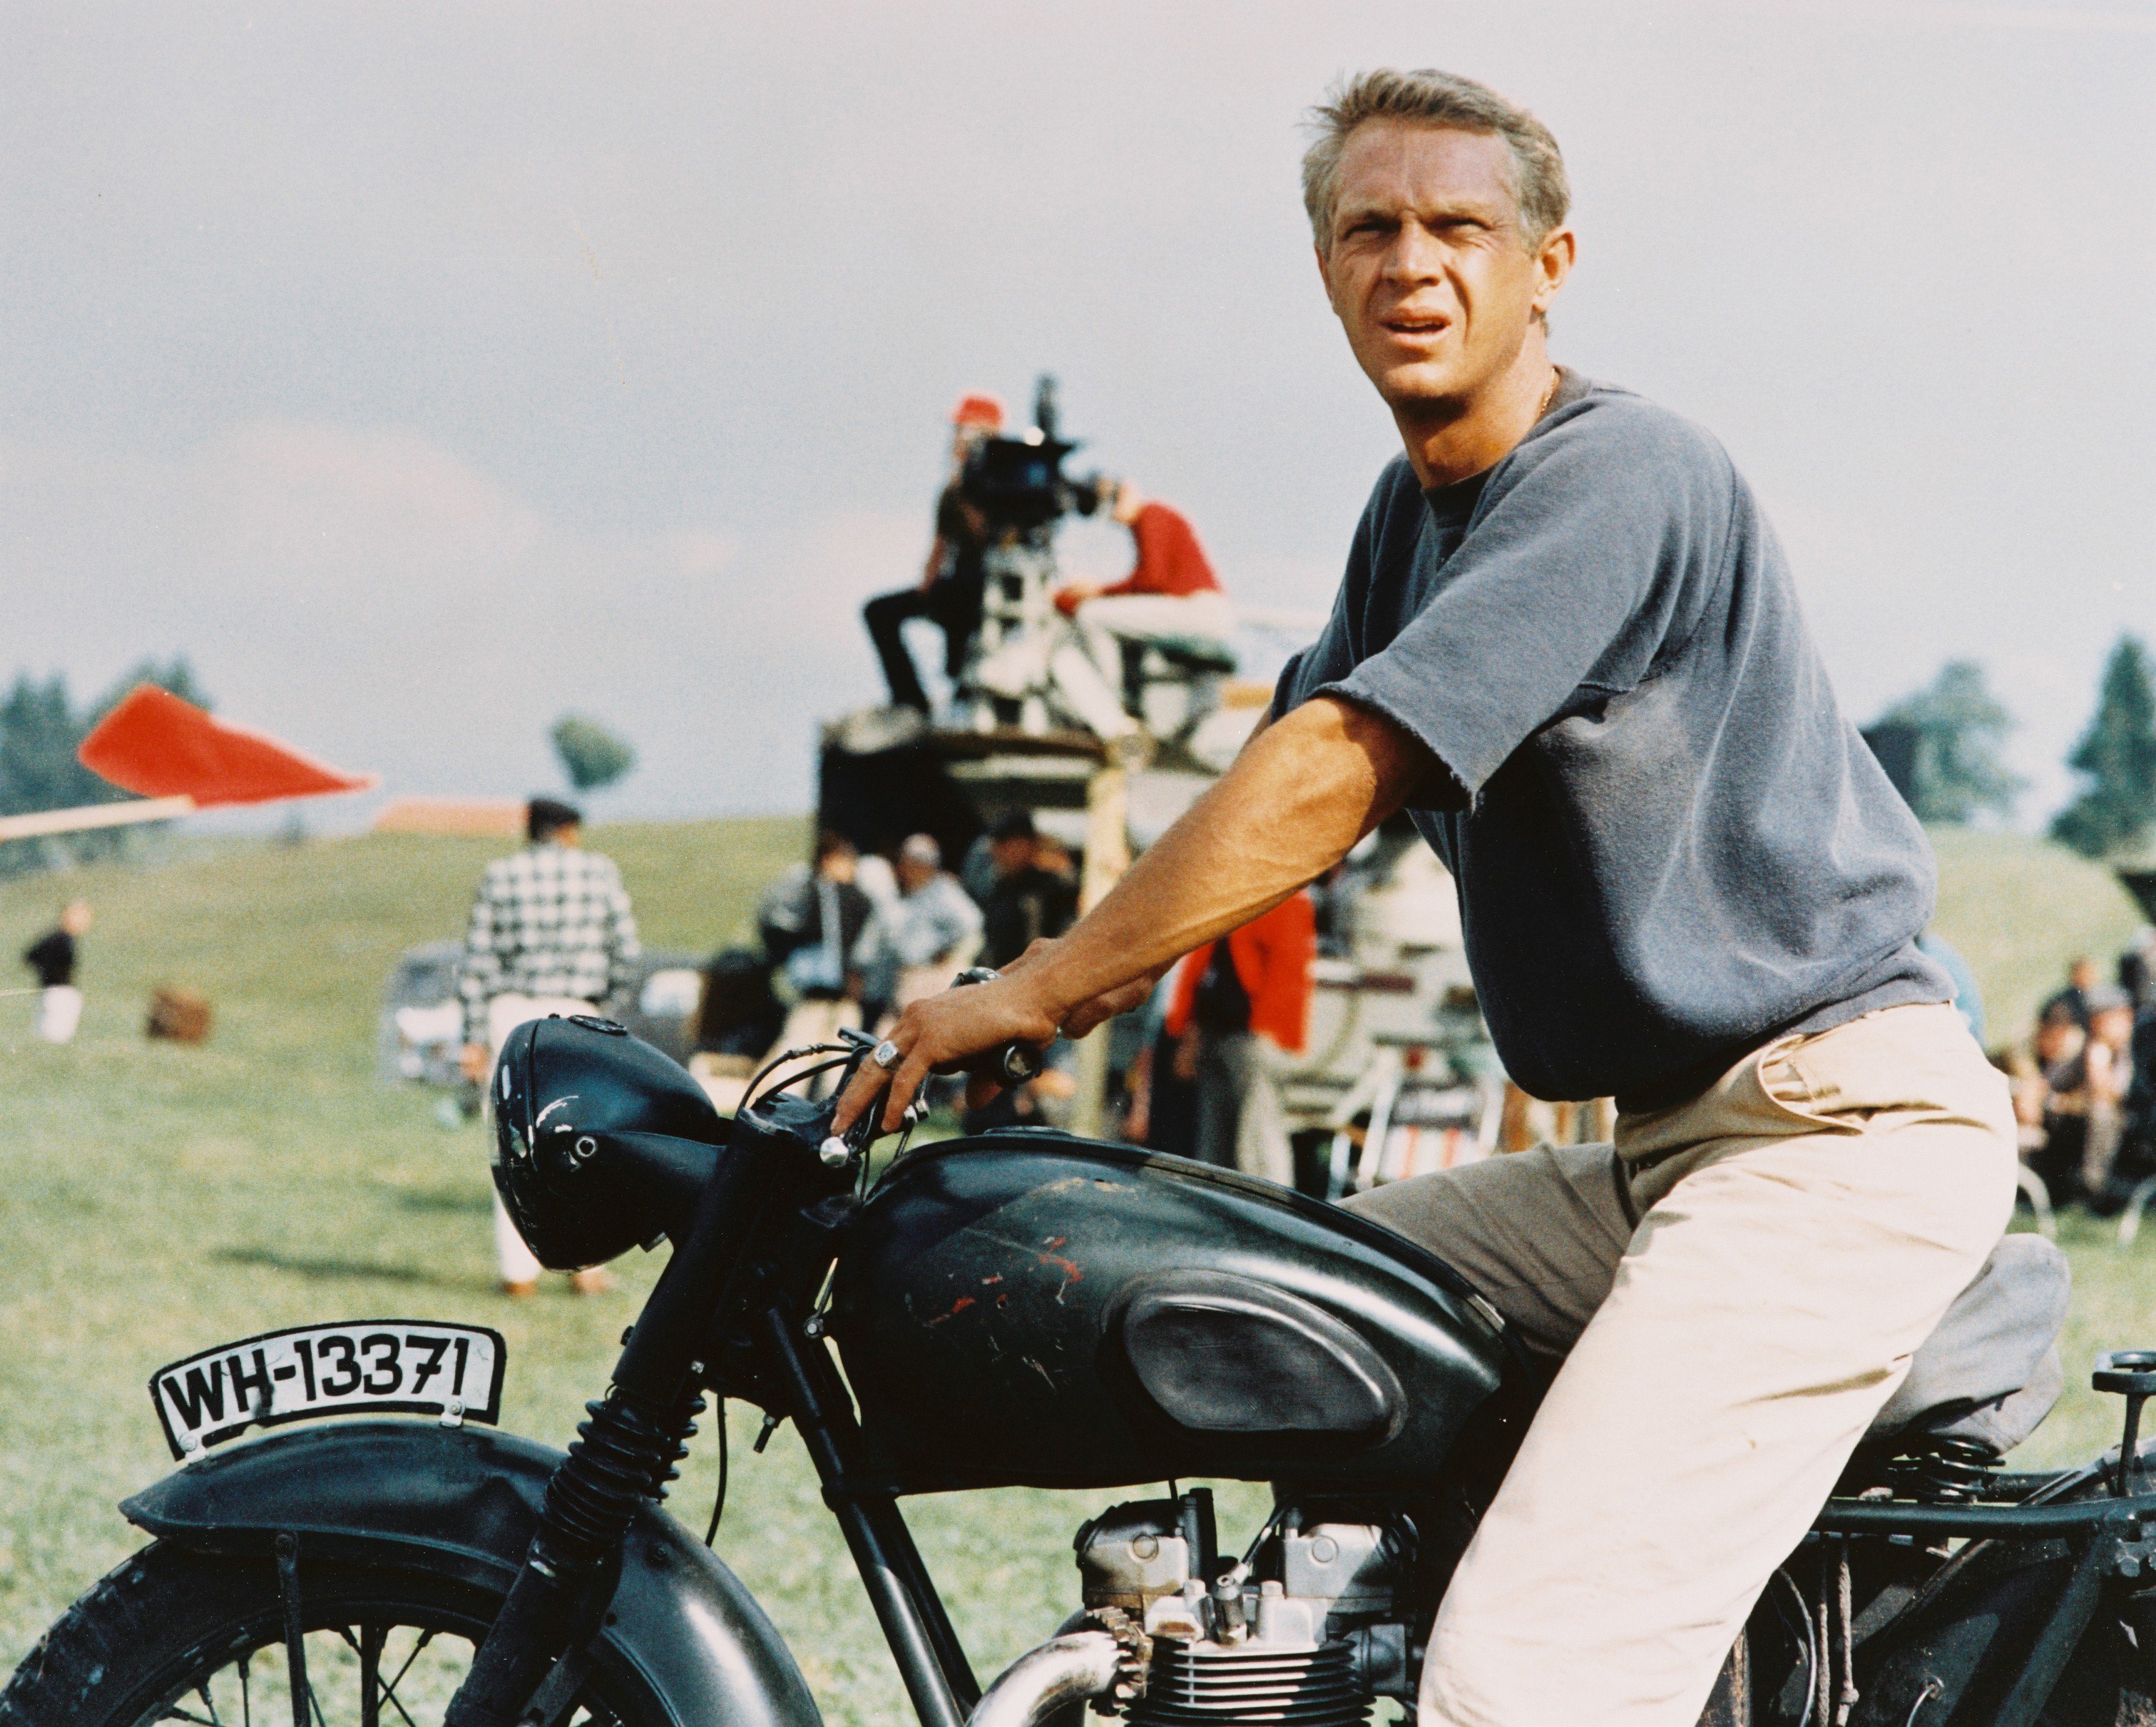 Steve McQueen filing "The Great Escape" in 1963. | Source: Getty Images